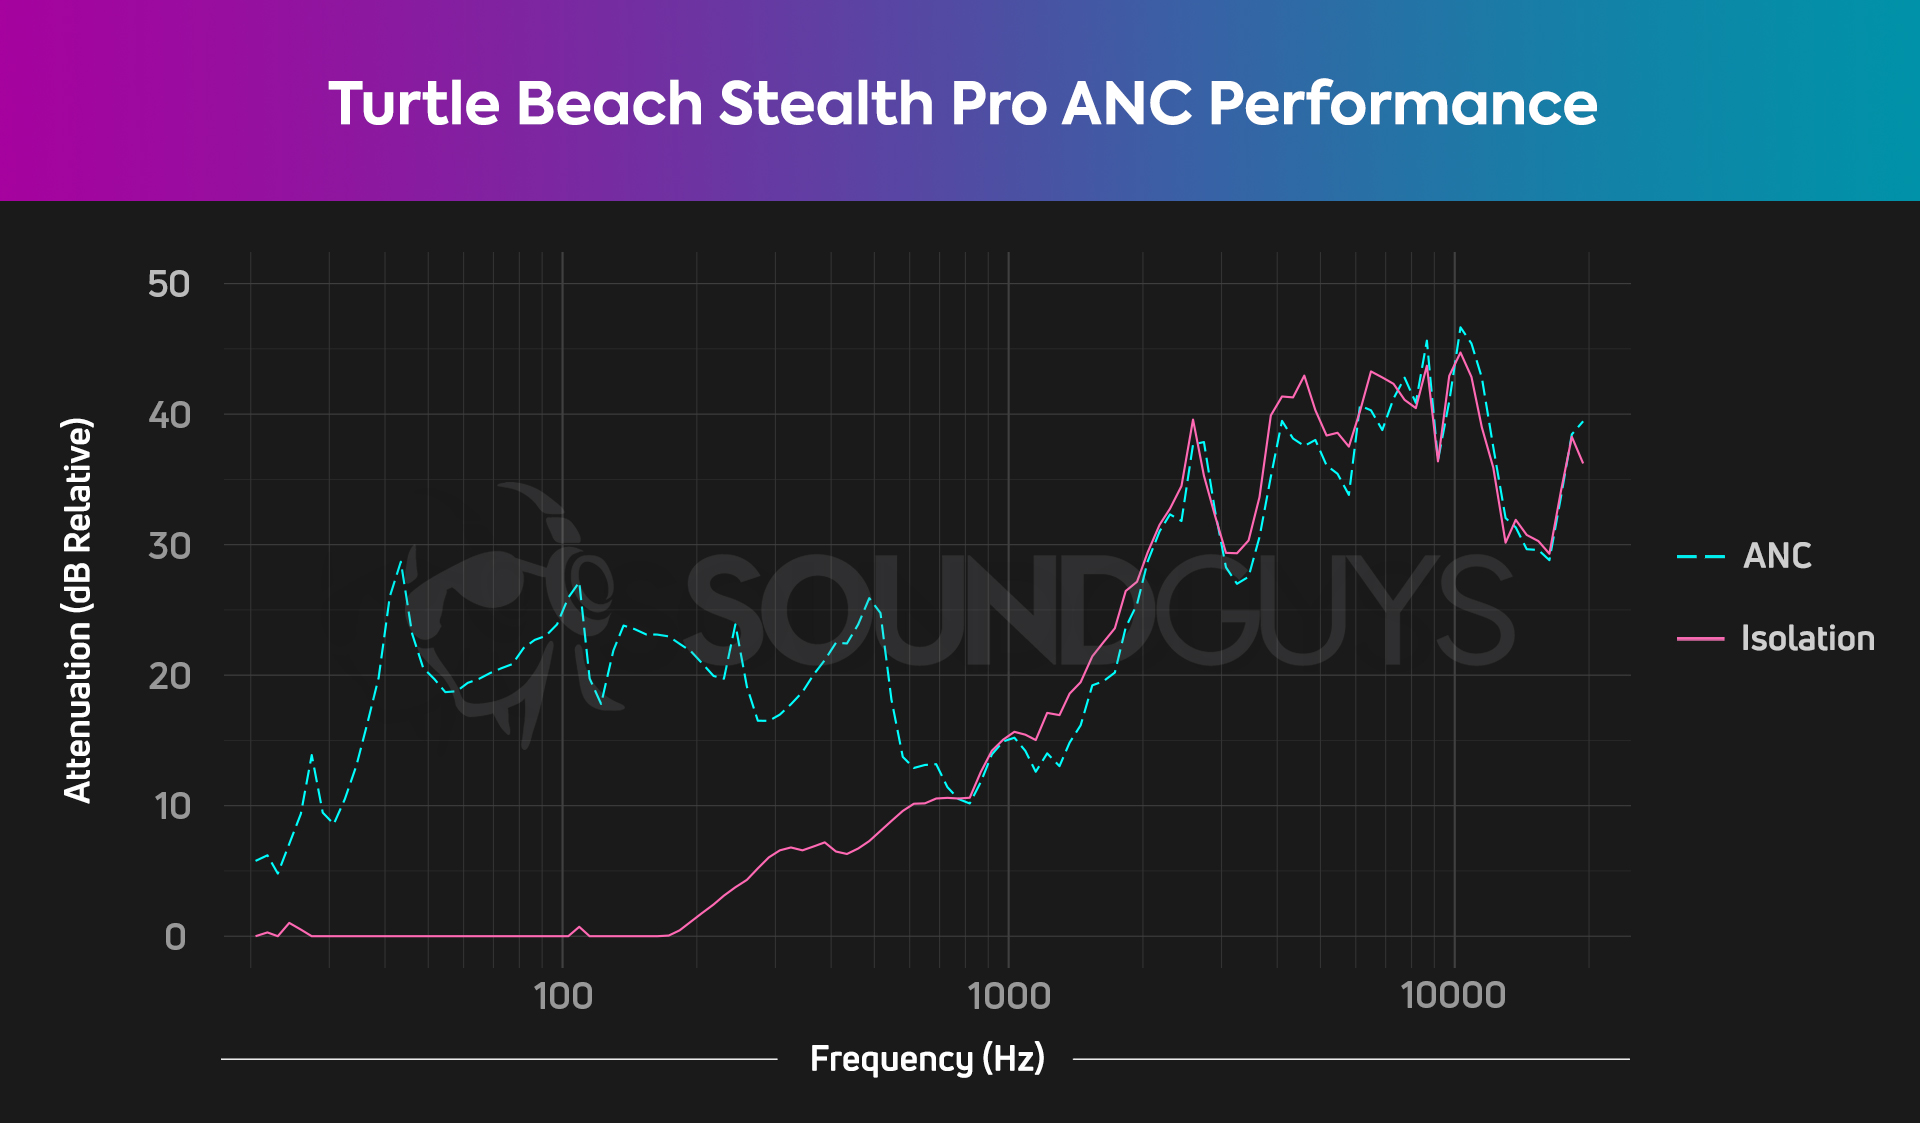 A noise canceling chart for the Turtle Beach Stealth Pro gaming headset, which shows better low end attenuation than basically any gaming headset on the market.